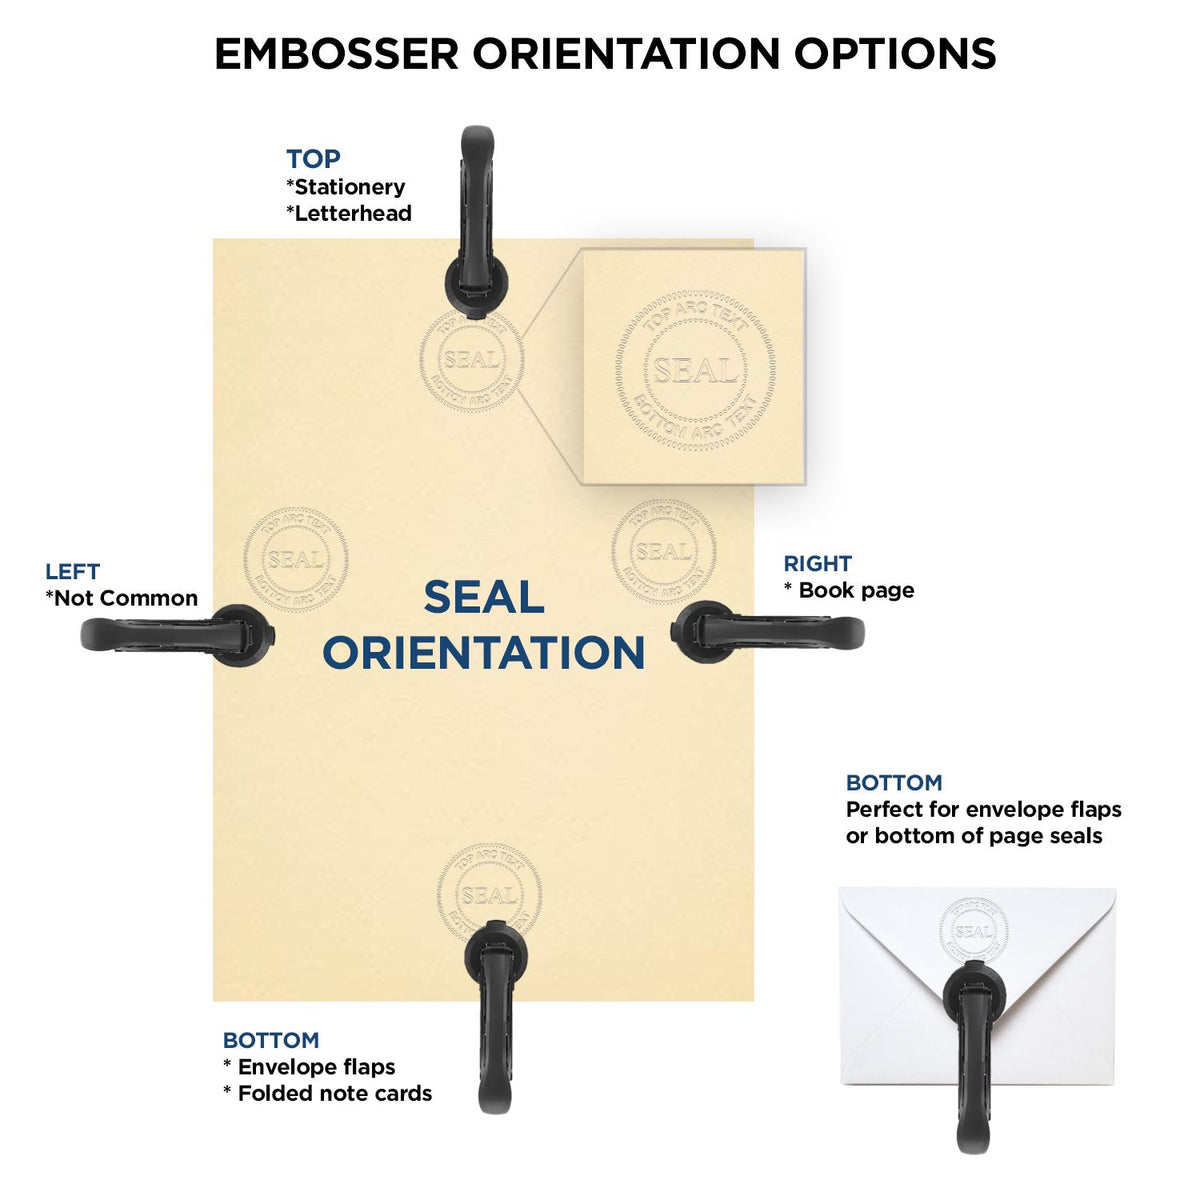 An infographic for the State of Maine Long Reach Architectural Embossing Seal showing embosser orientation, this is showing examples of a top, bottom, right and left insert.